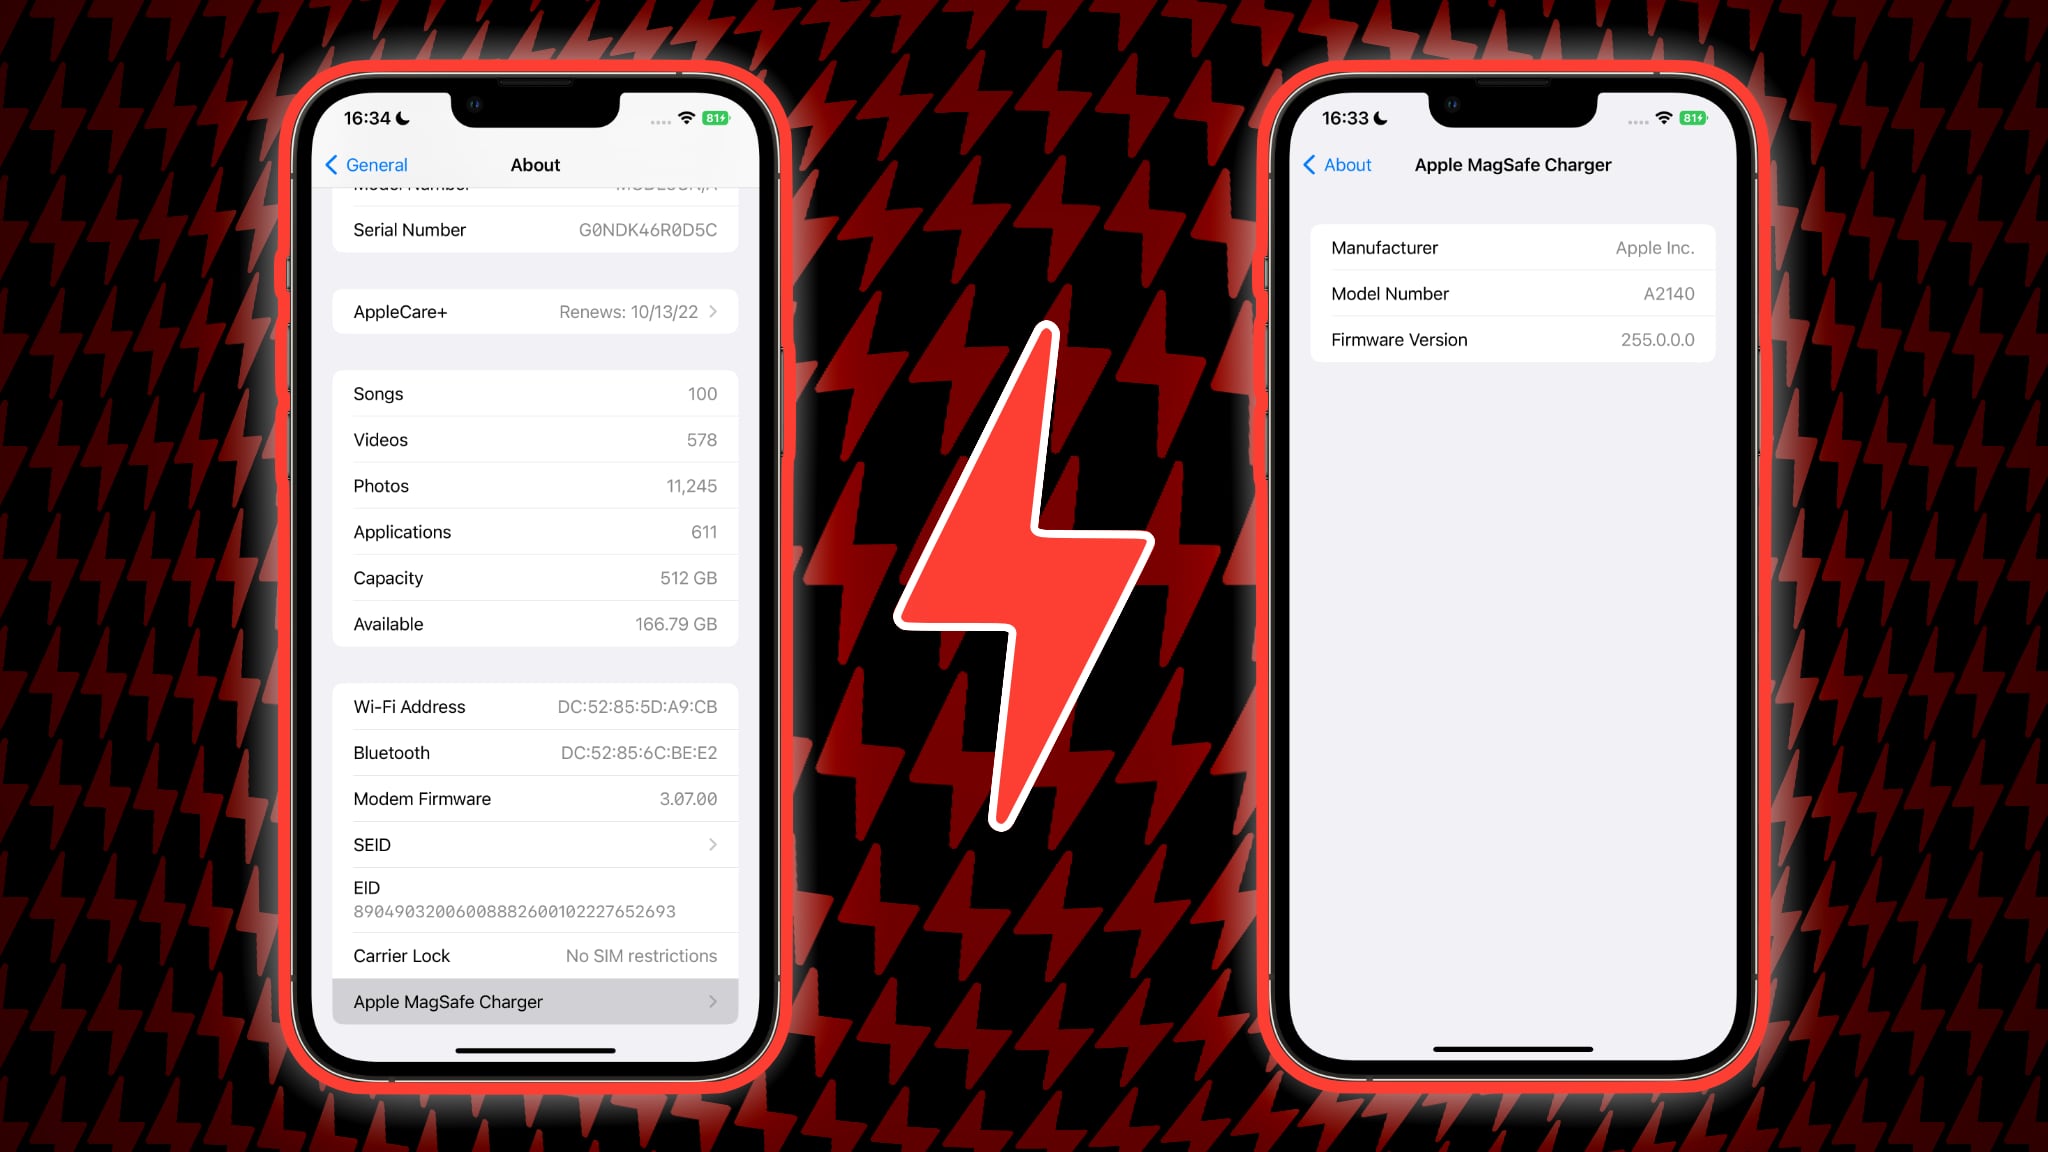 Two iPhone screenshots showing the MagSafe charger firmware and model numbers in the Settings app, set against a dark red background filled with power icons